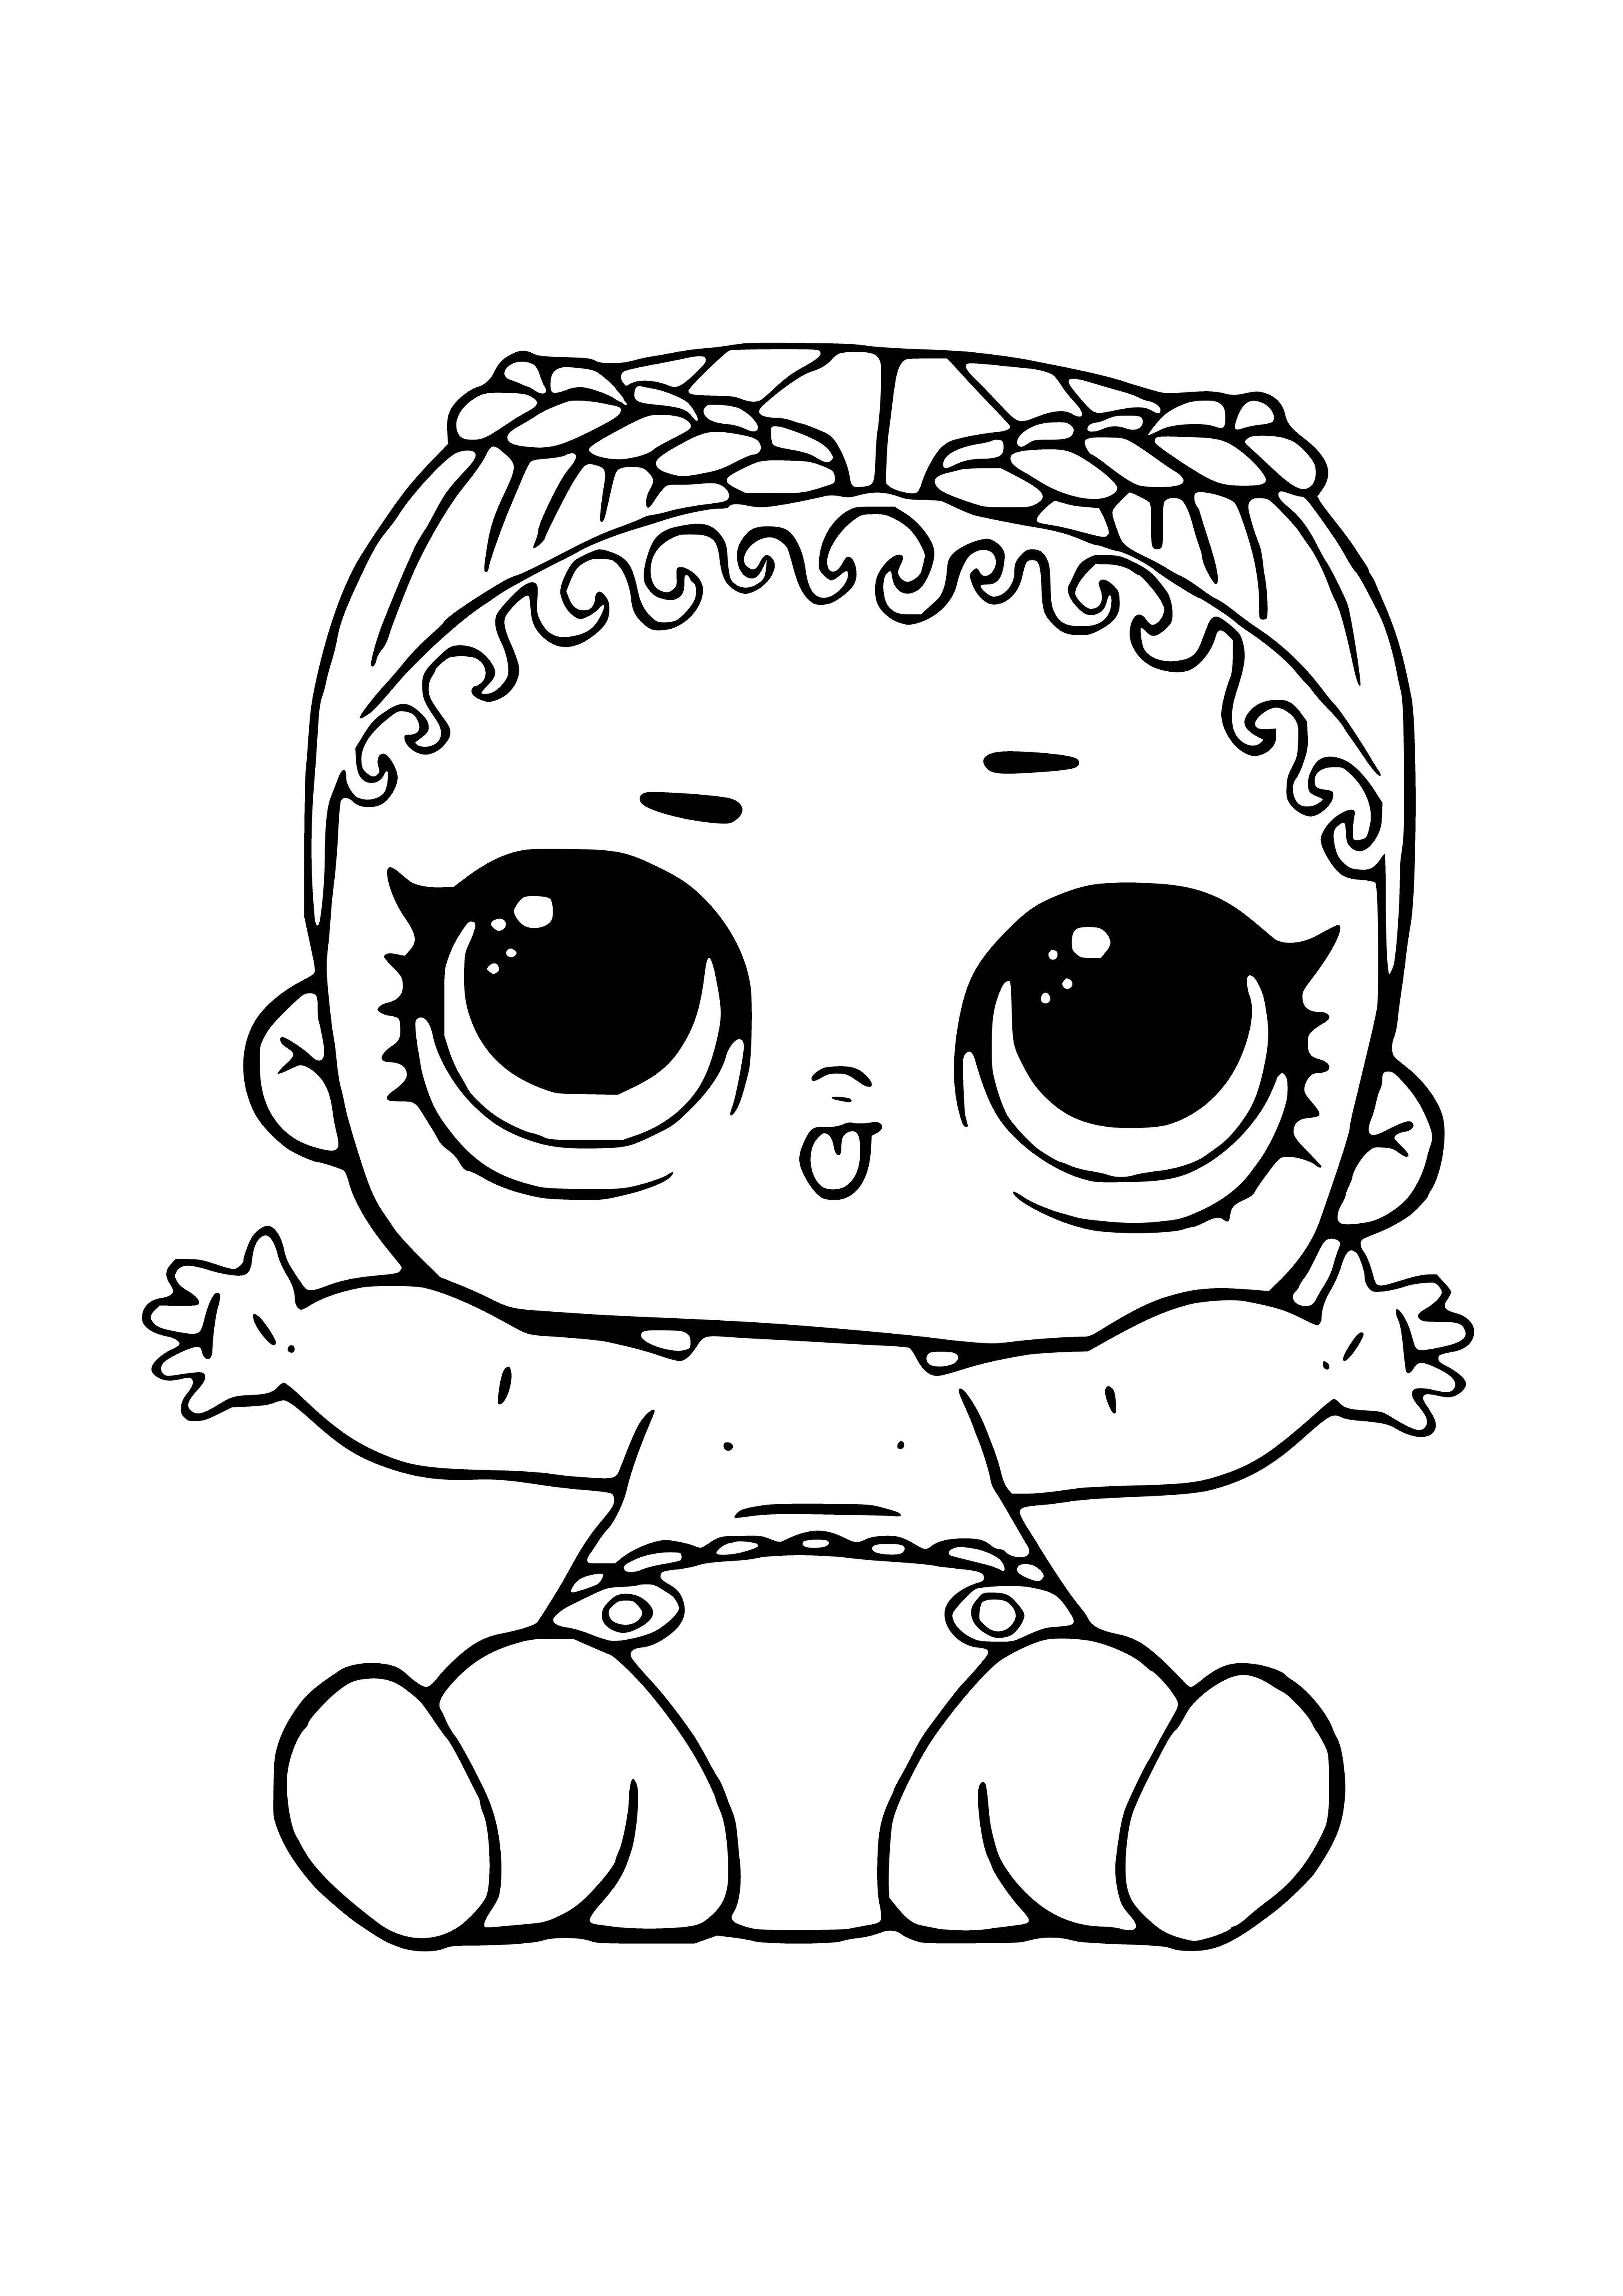 coloring page: Baby mermaid swims with her tail, holding a pink fish in her hand! #LittleMermaid #Fish